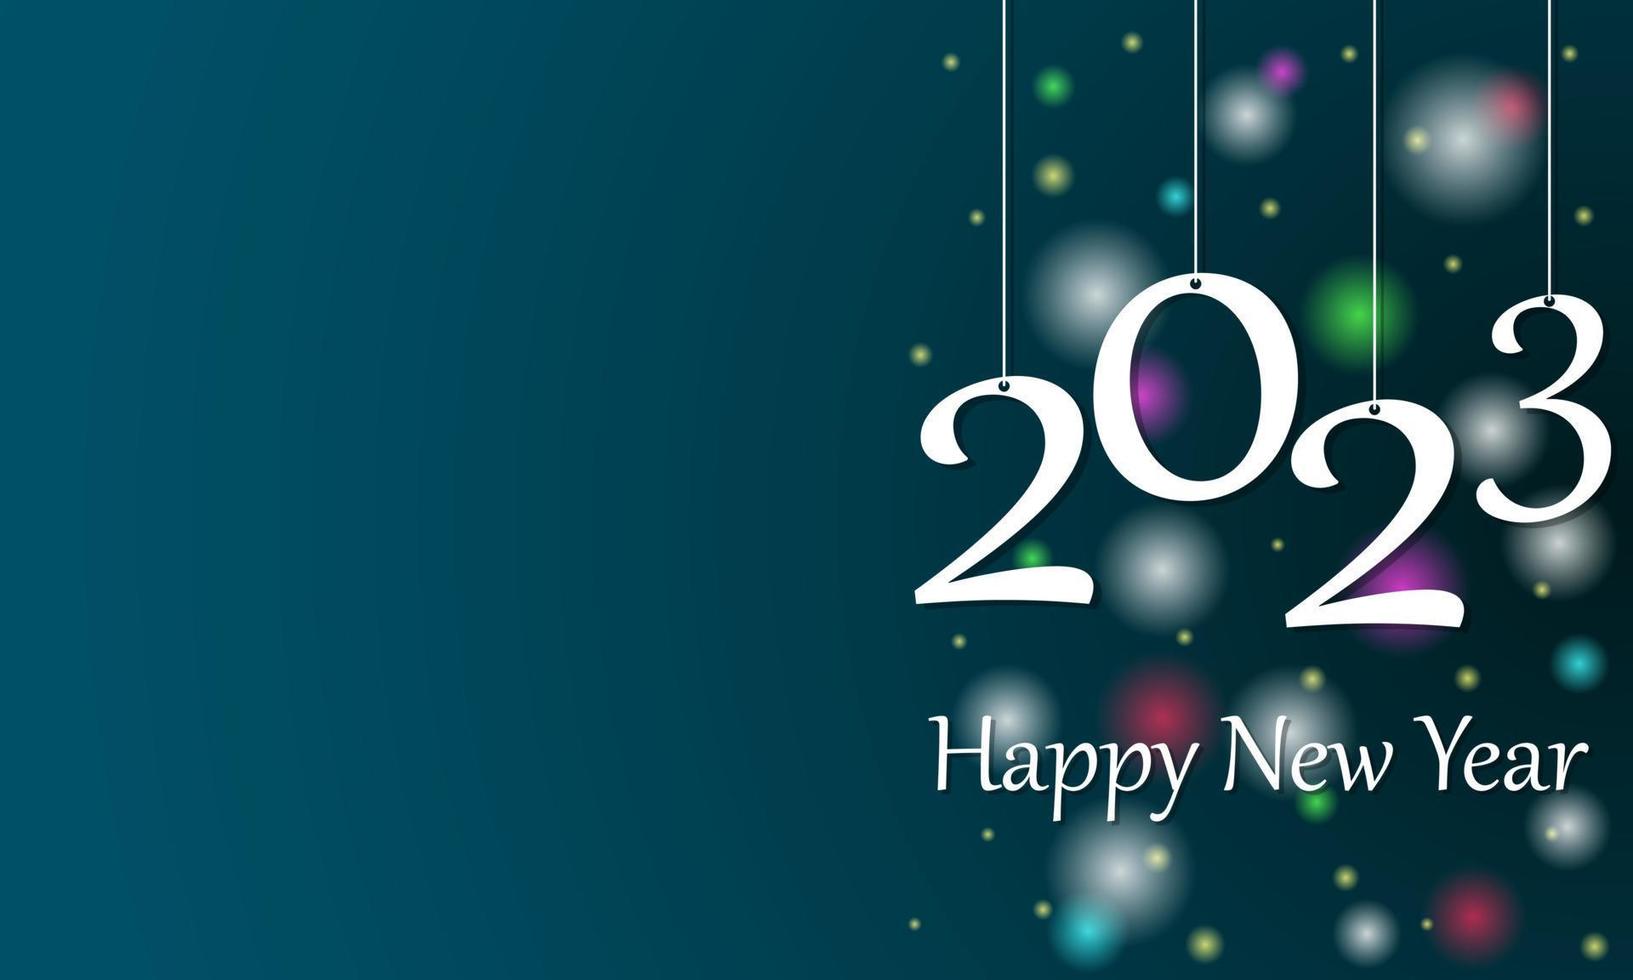 Download 50+ New Year 2020 Wallpapers for Smartphones